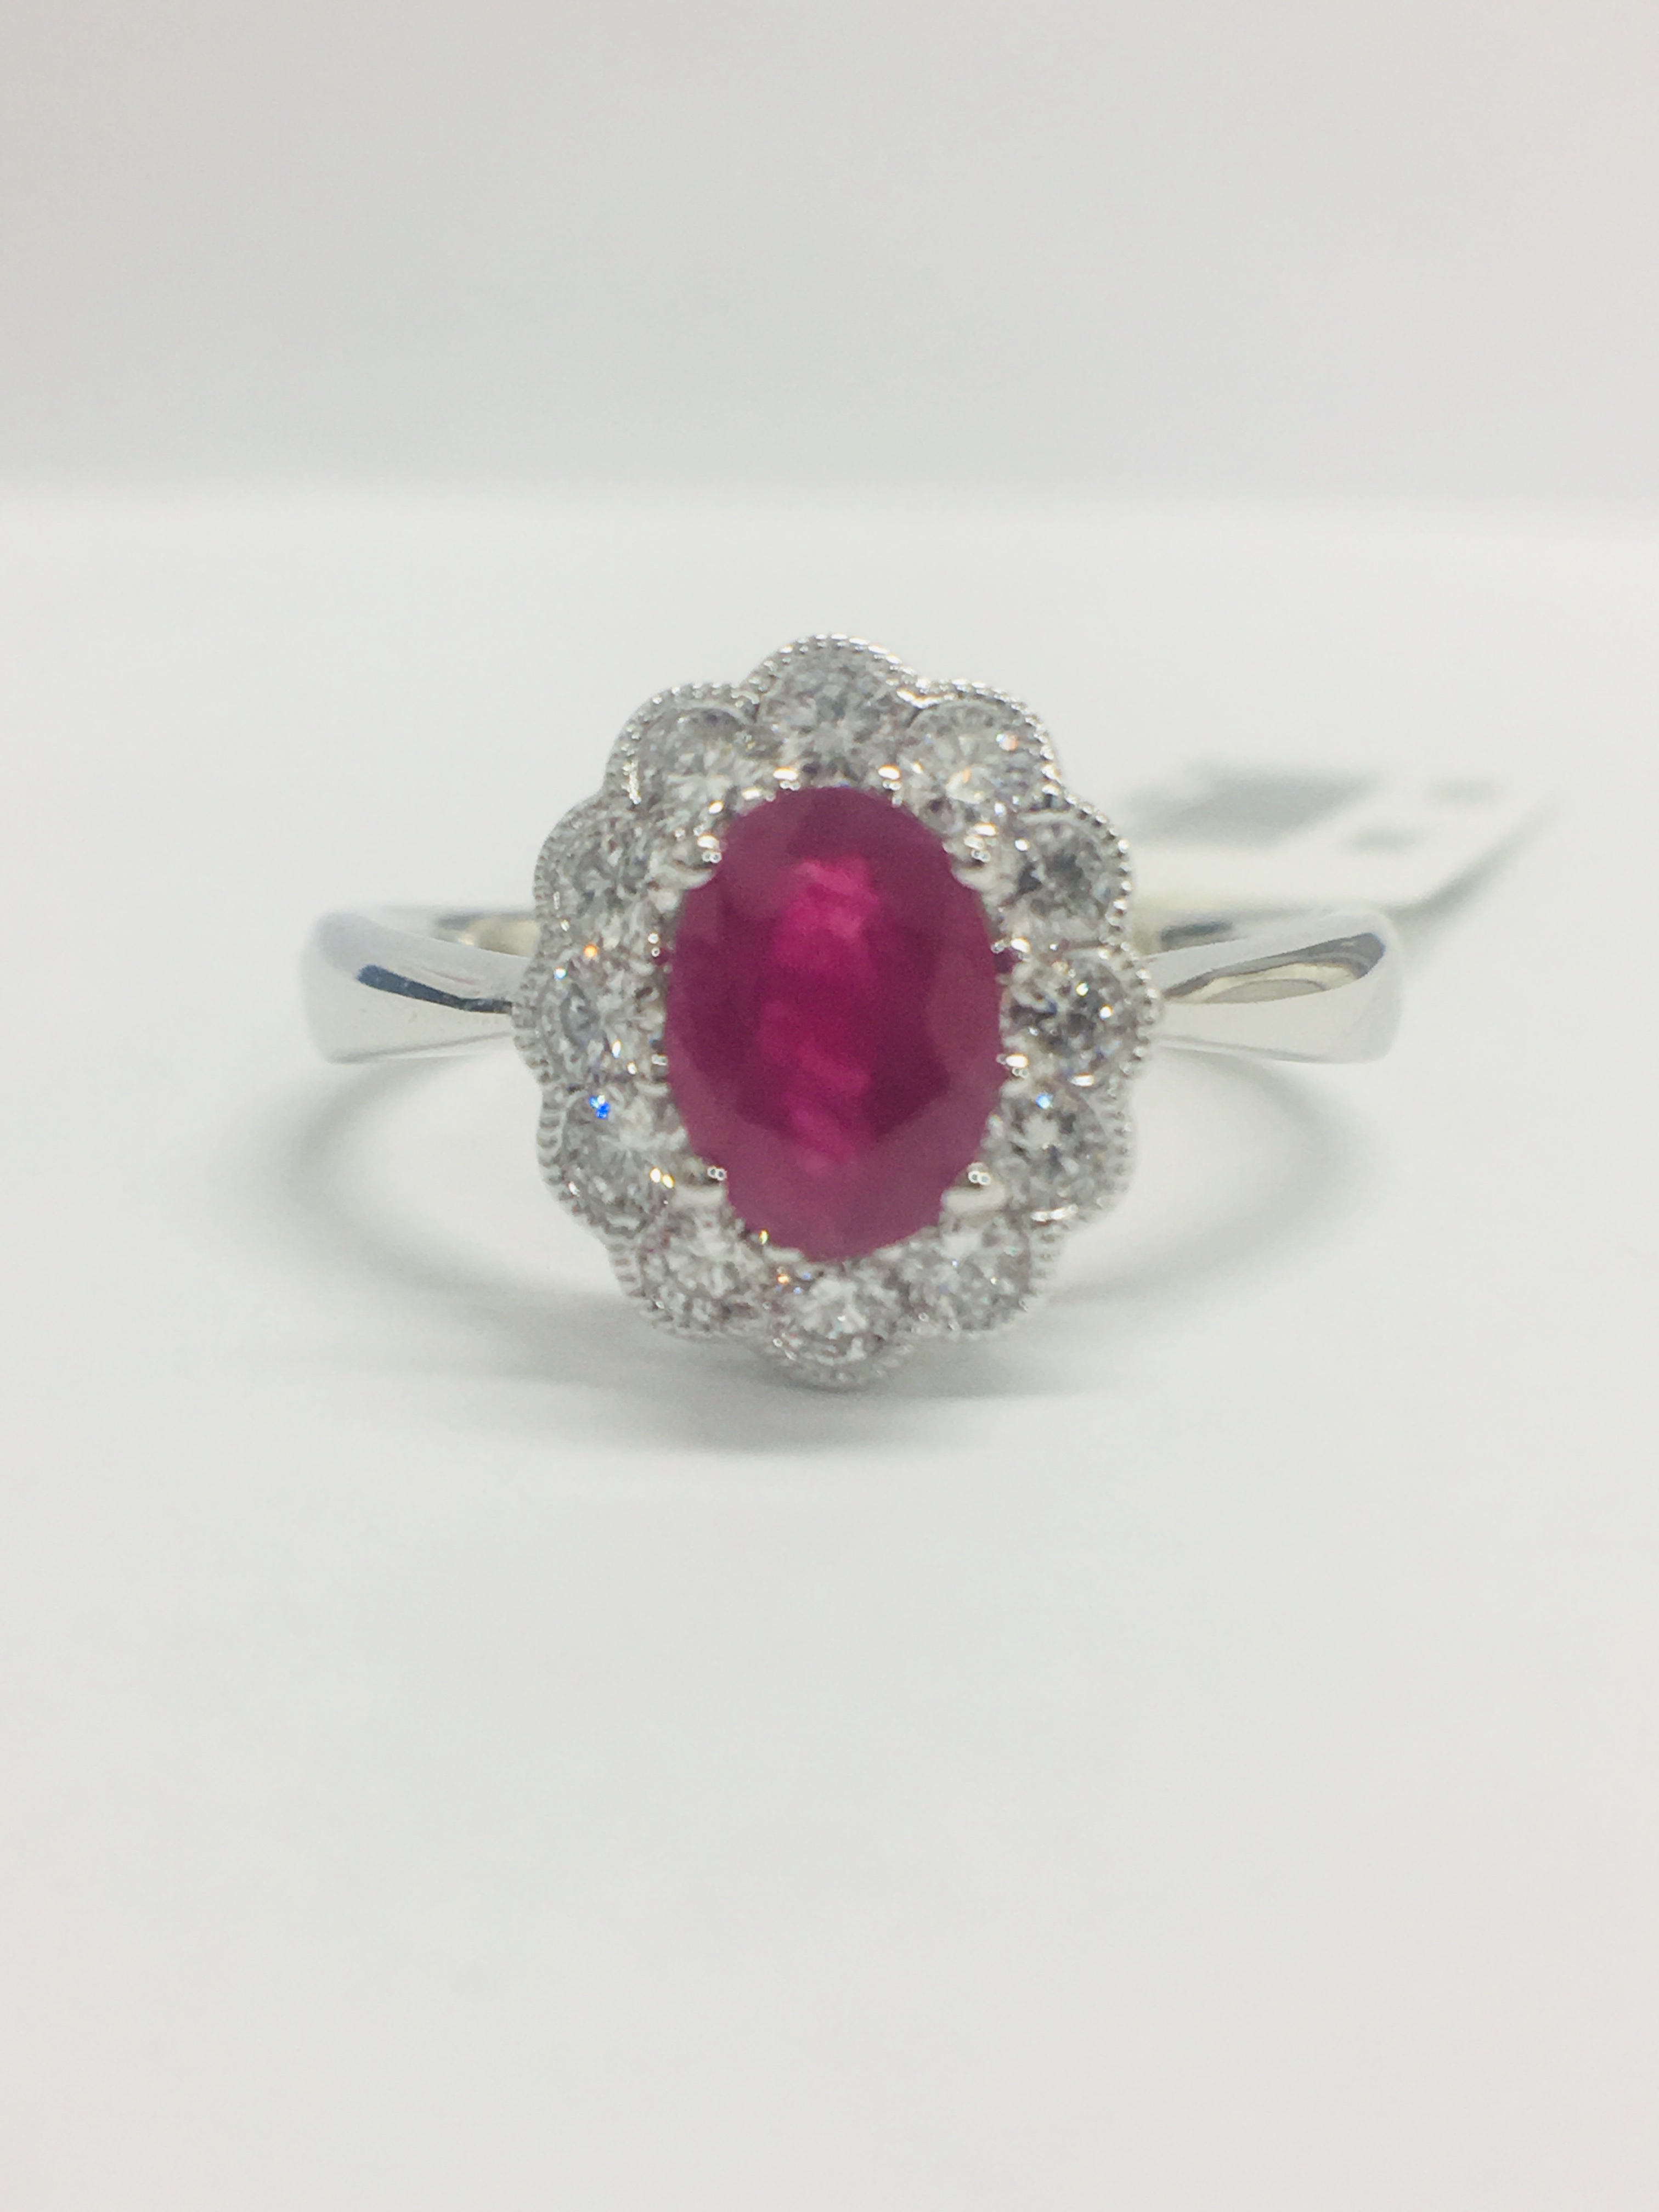 18Ct White Gold Ruby Diamond Cluster Ring,